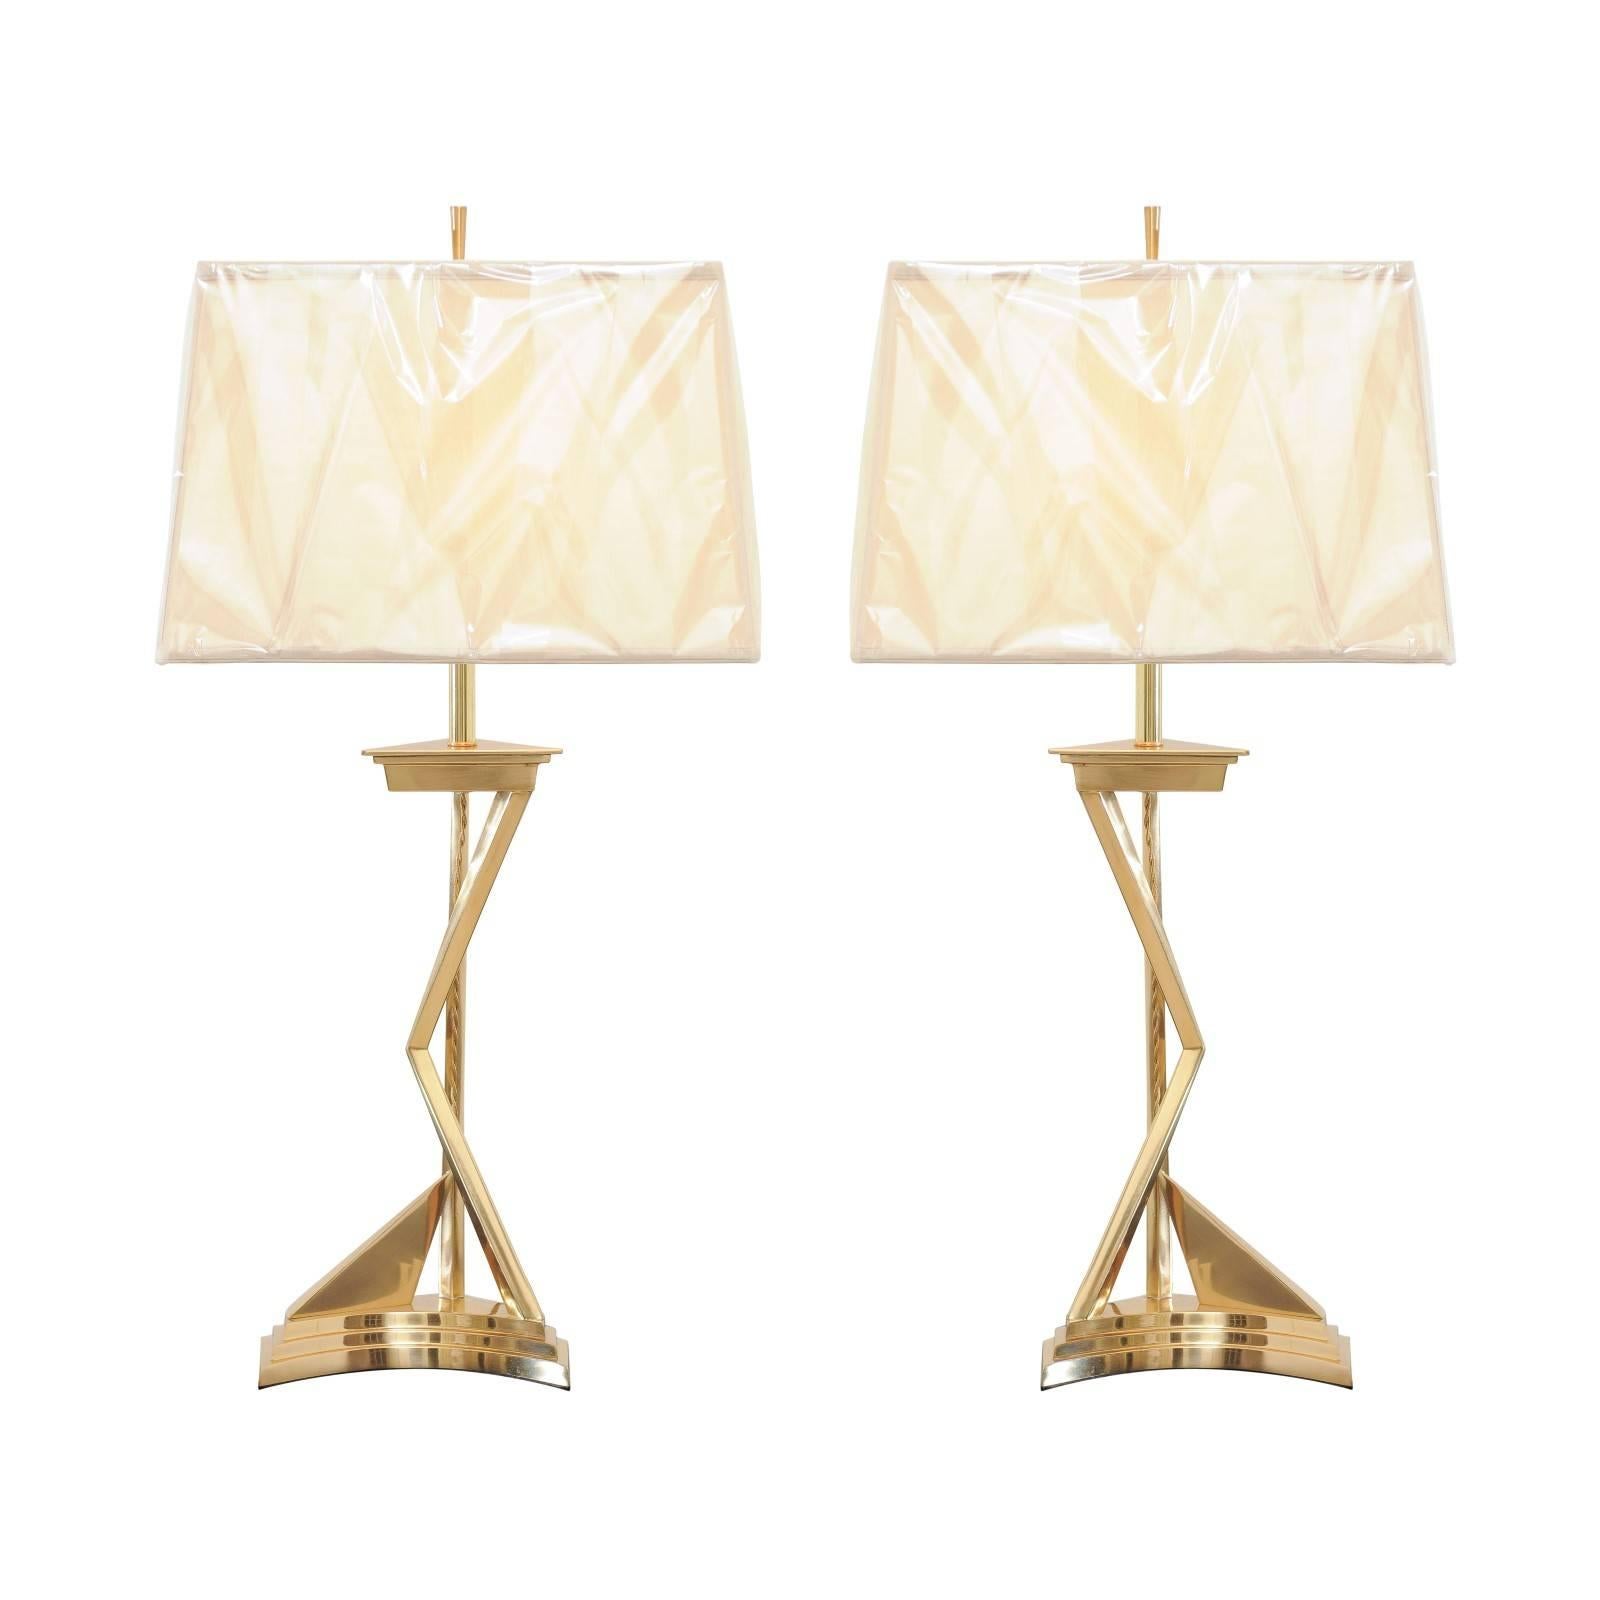 Exquisite Pair of Modern Brass Lamps in the Style of Parzinger, circa 1960 For Sale